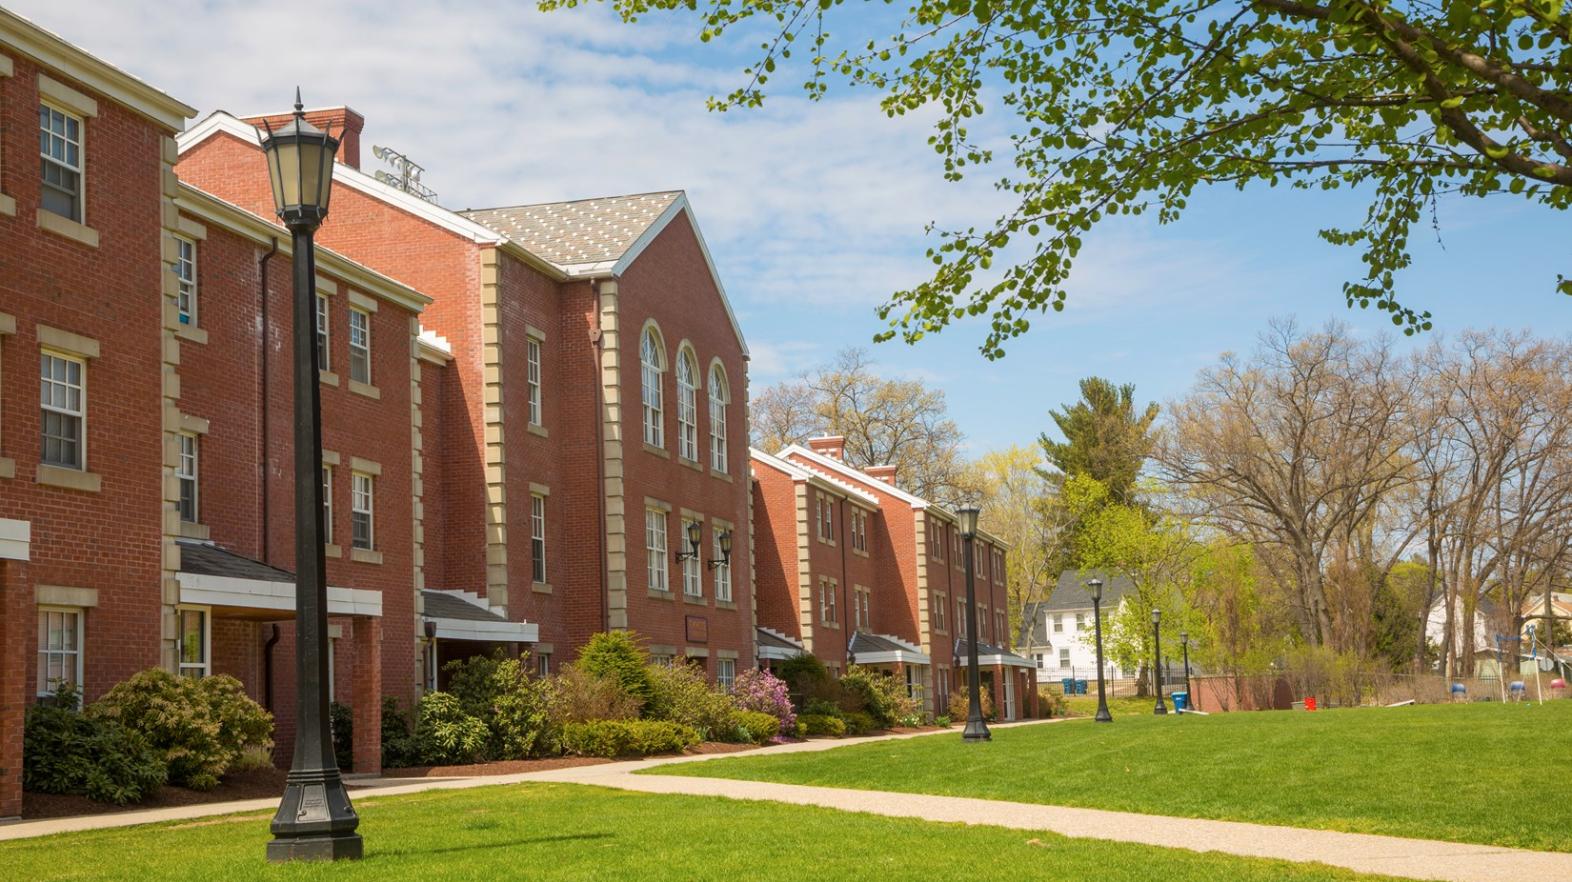 Townhouses residence hall